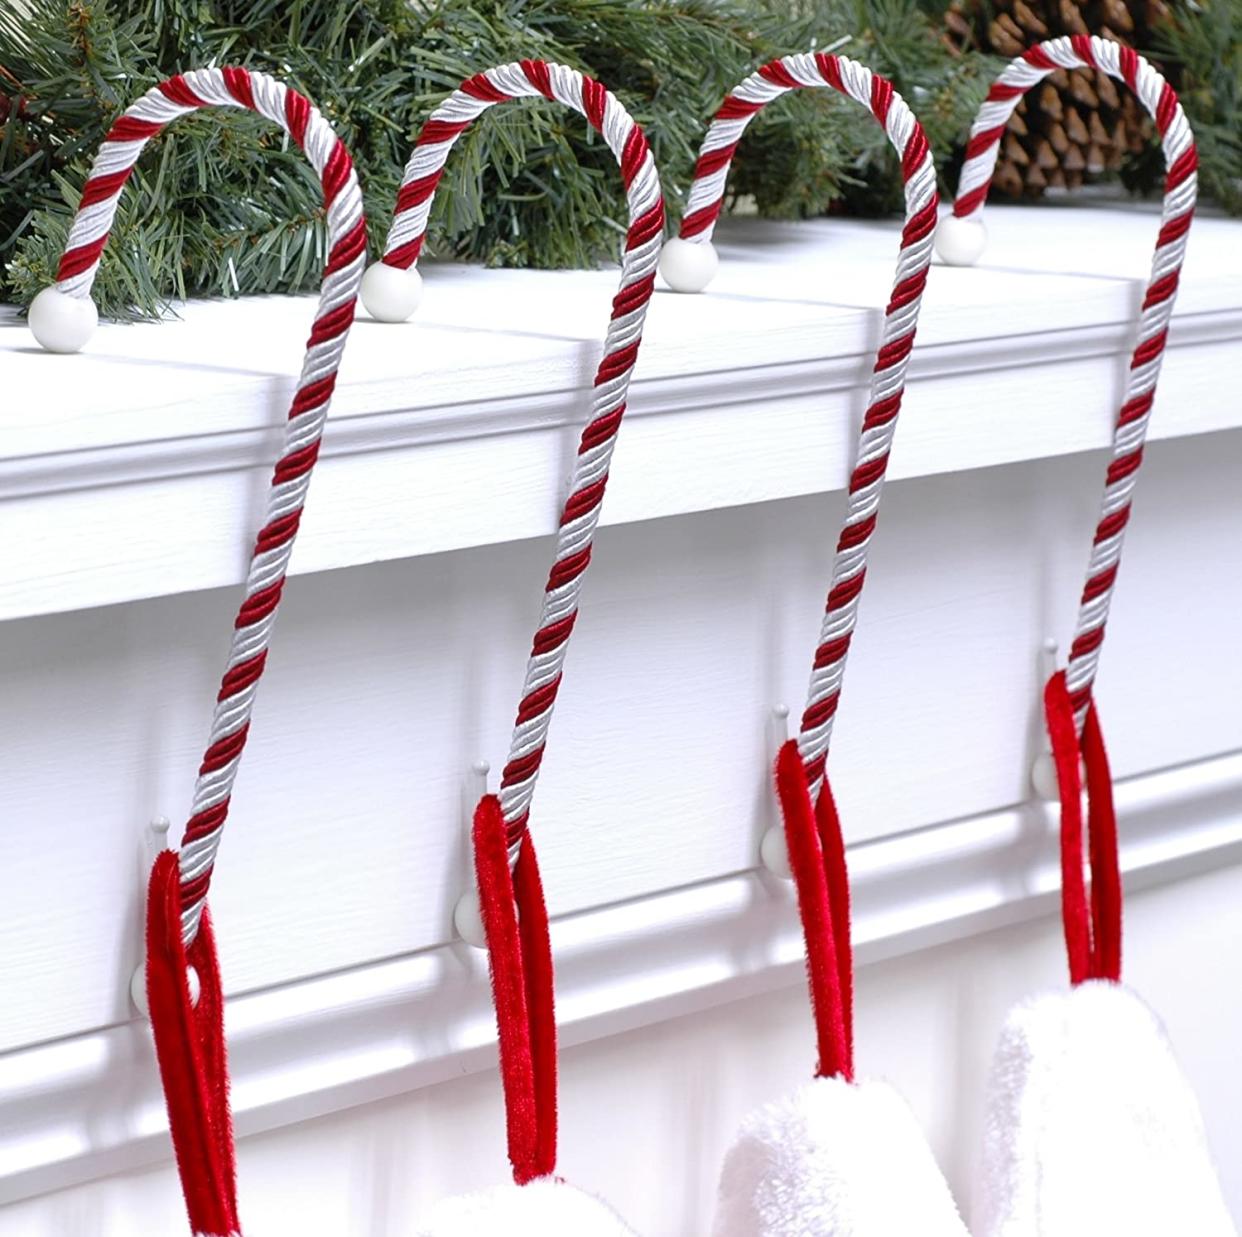 candy cane stocking holders